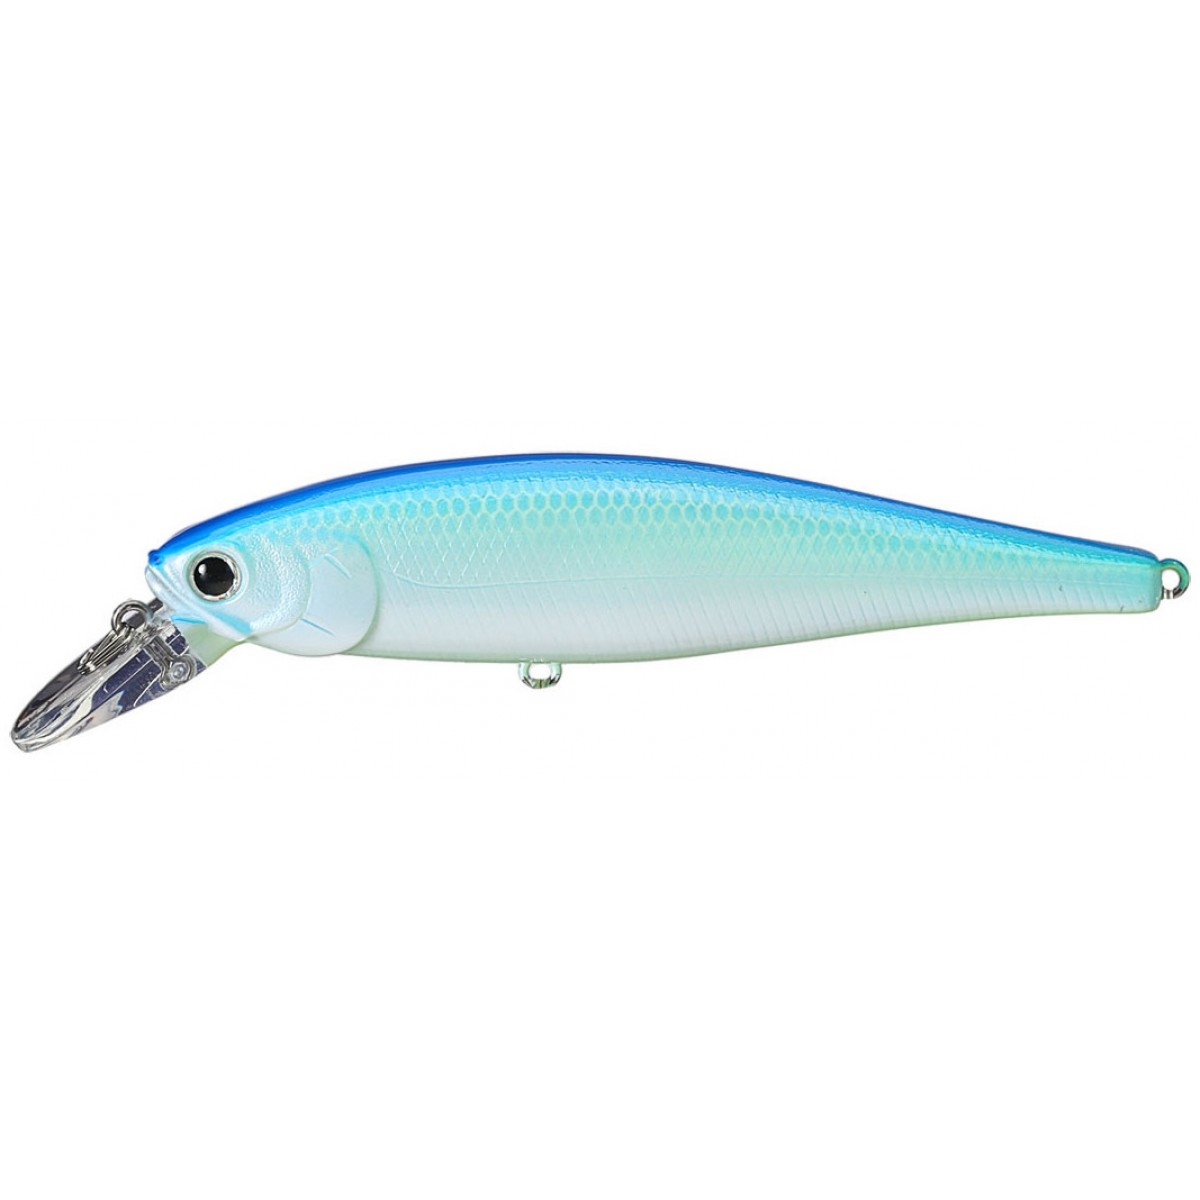 Lucky Craft B'FREEZE VERSATILE 100S MINNOW 4" LONG IN PEARL AYU WEIGHTS 5/8 OZ 